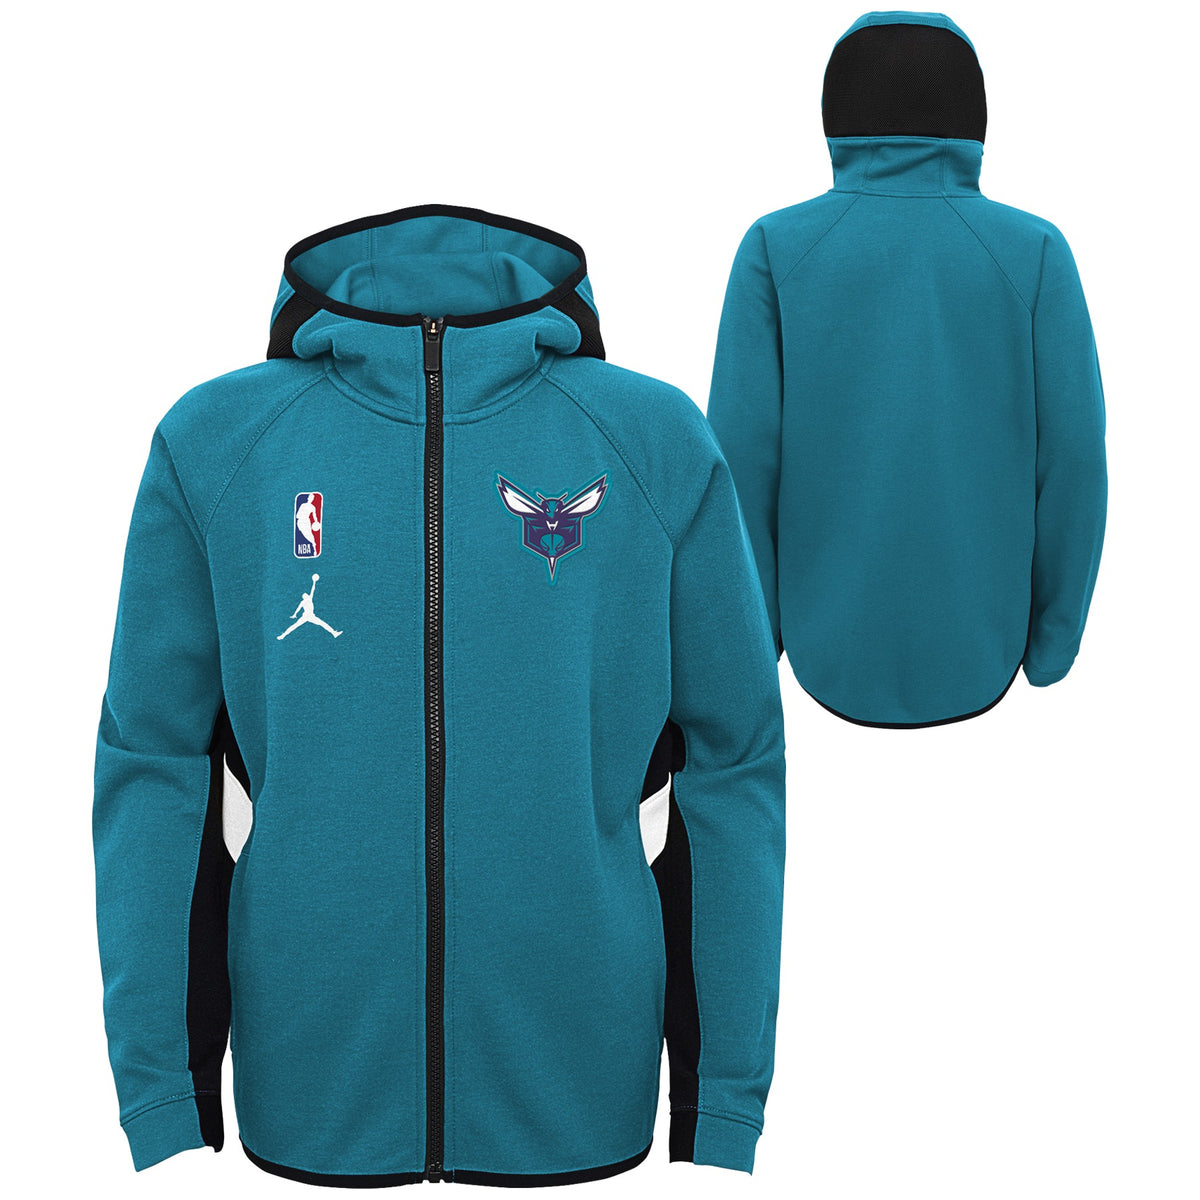 New Orleans Hornets Youth Warm-Up Jacket